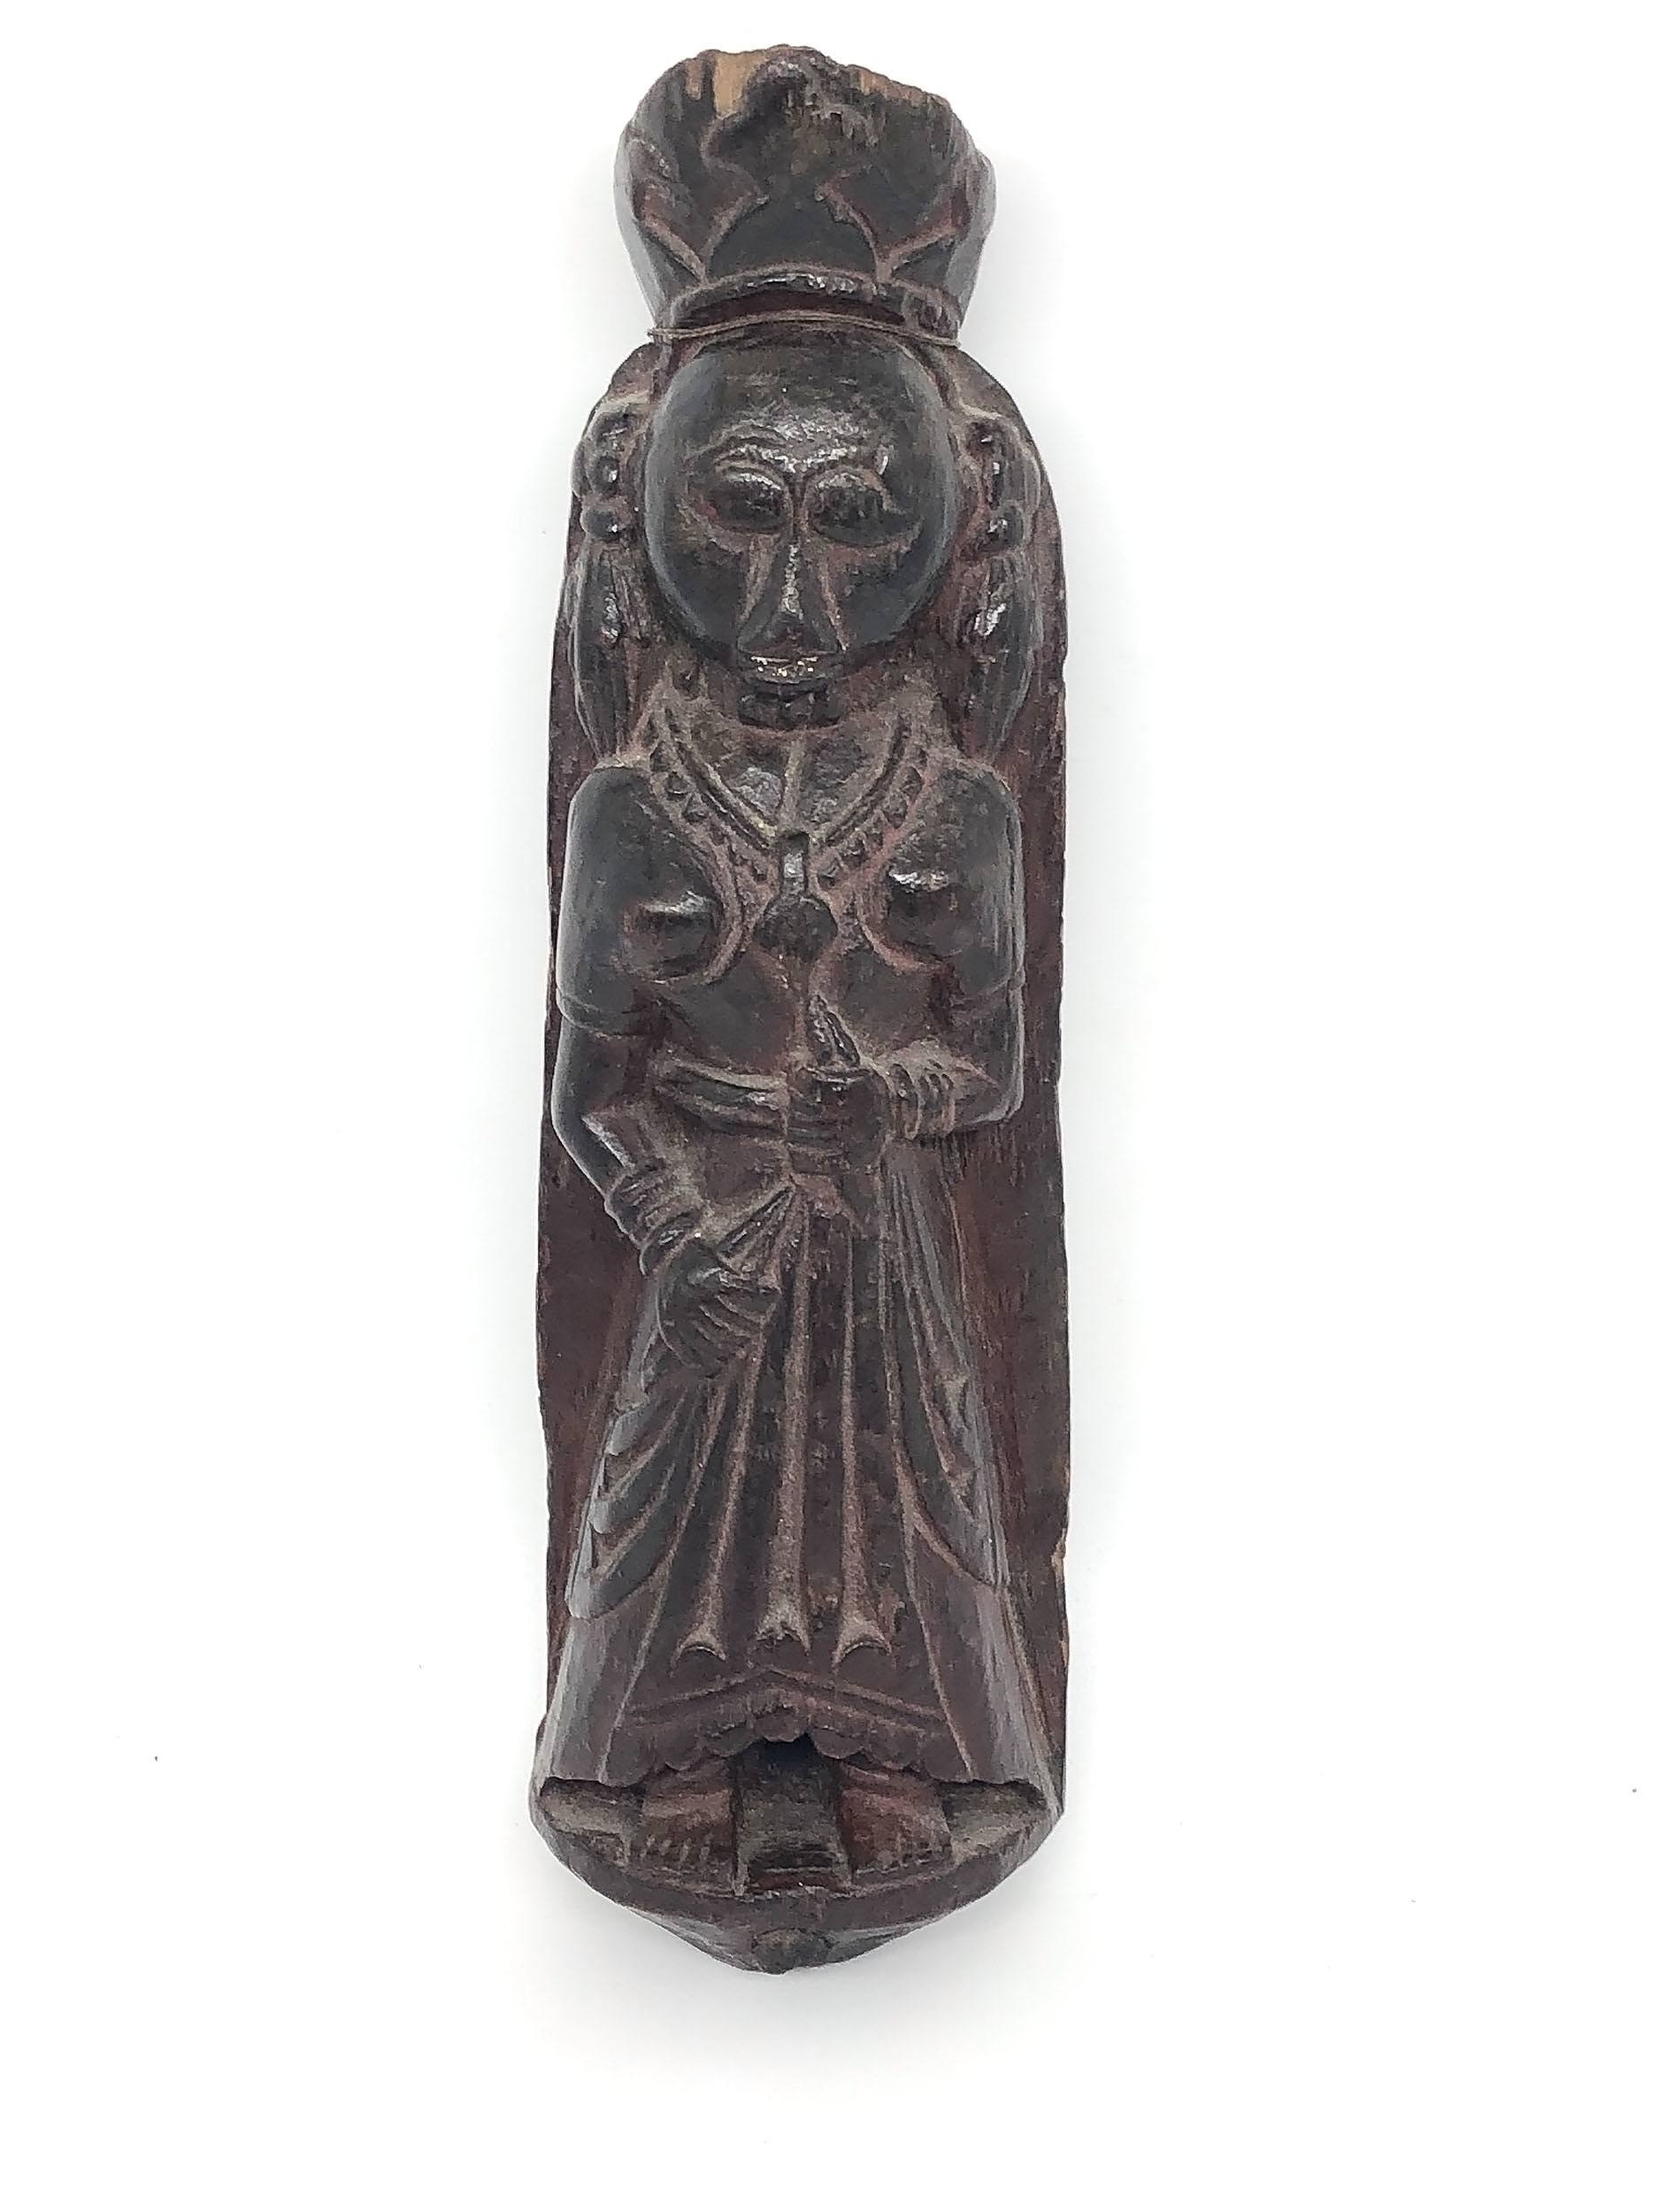 'Antique Indian Carved and Lacquered Wood Deity'